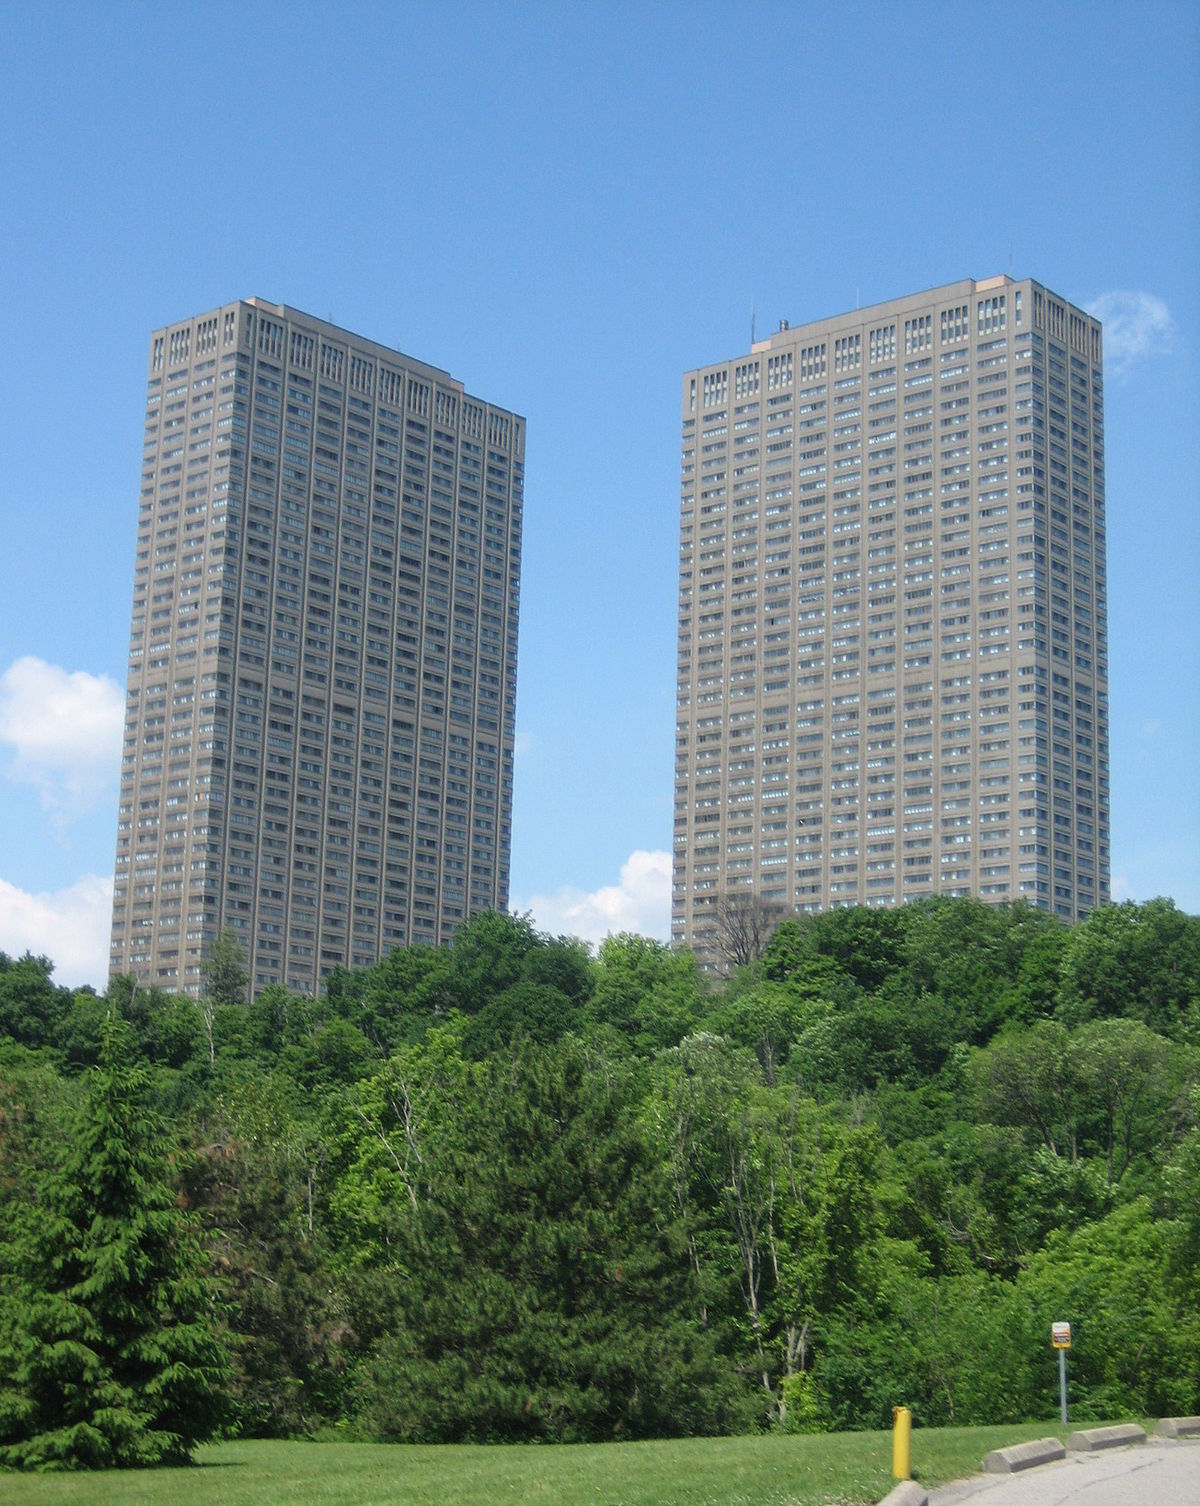 High Rise Towers | Low Density Development that Looks the Opposite | Wikipedia